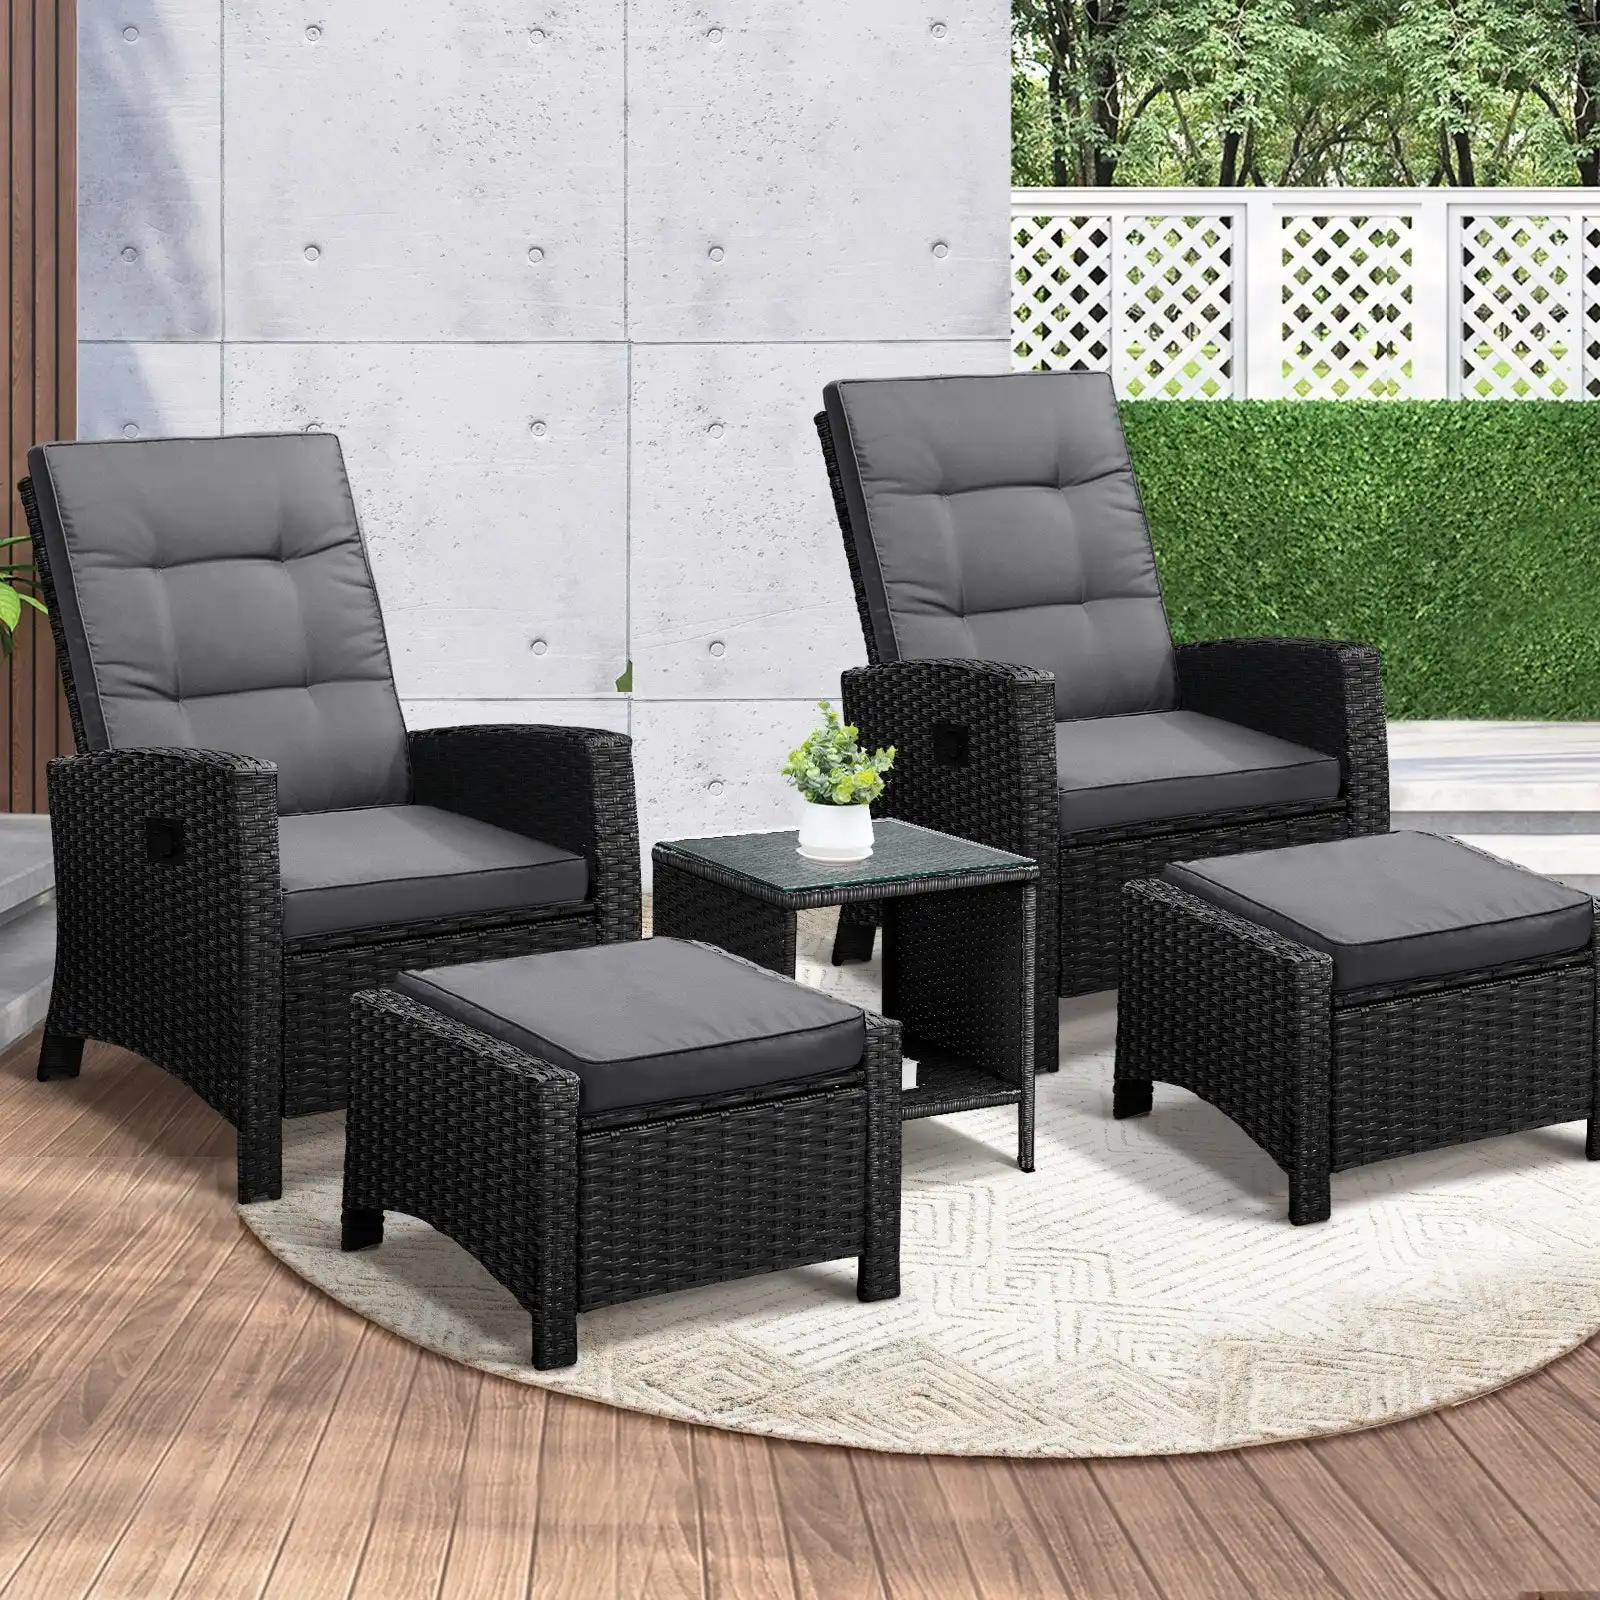 Livsip Outdoor  Recliner Chair & Table Set Wicker lounge Patio Furniture Setting